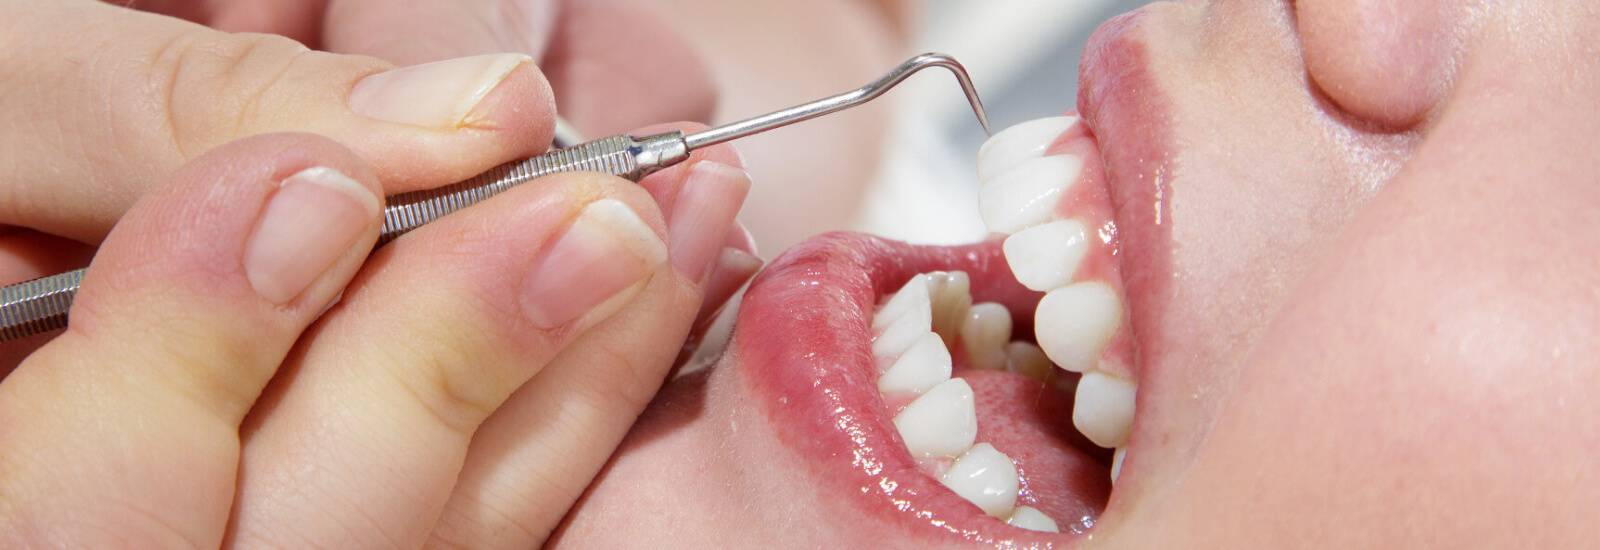 Best Teeth Cleaning Near Me | Affordable Teeth Clean Cost